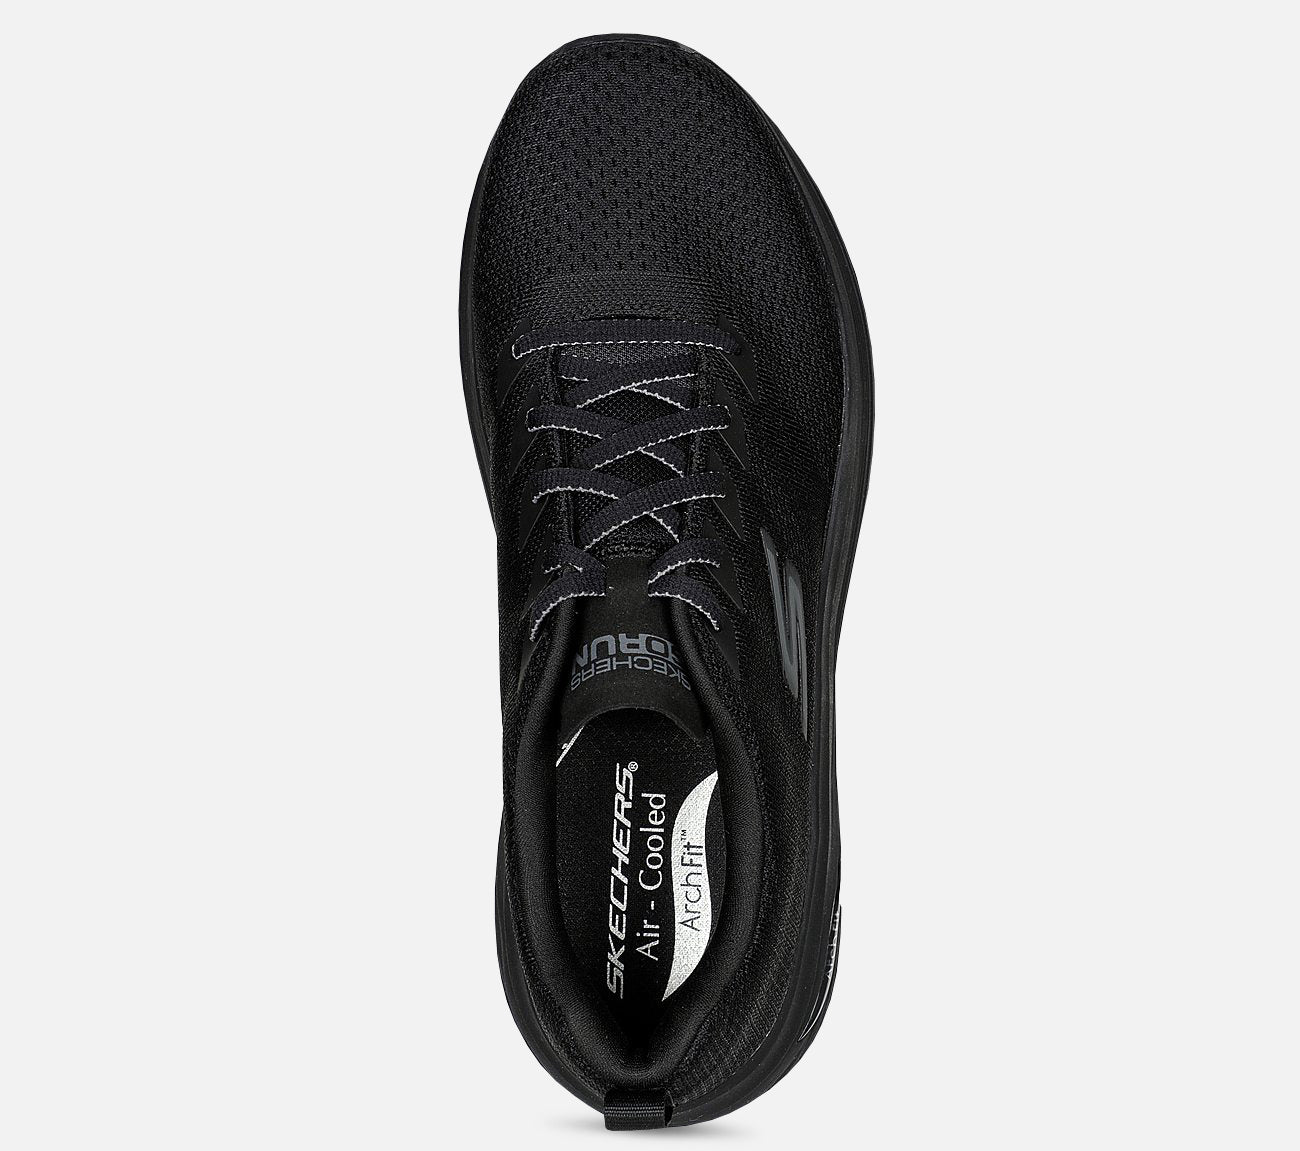 Max Cushioning Arch Fit - Unifier Shoe Skechers